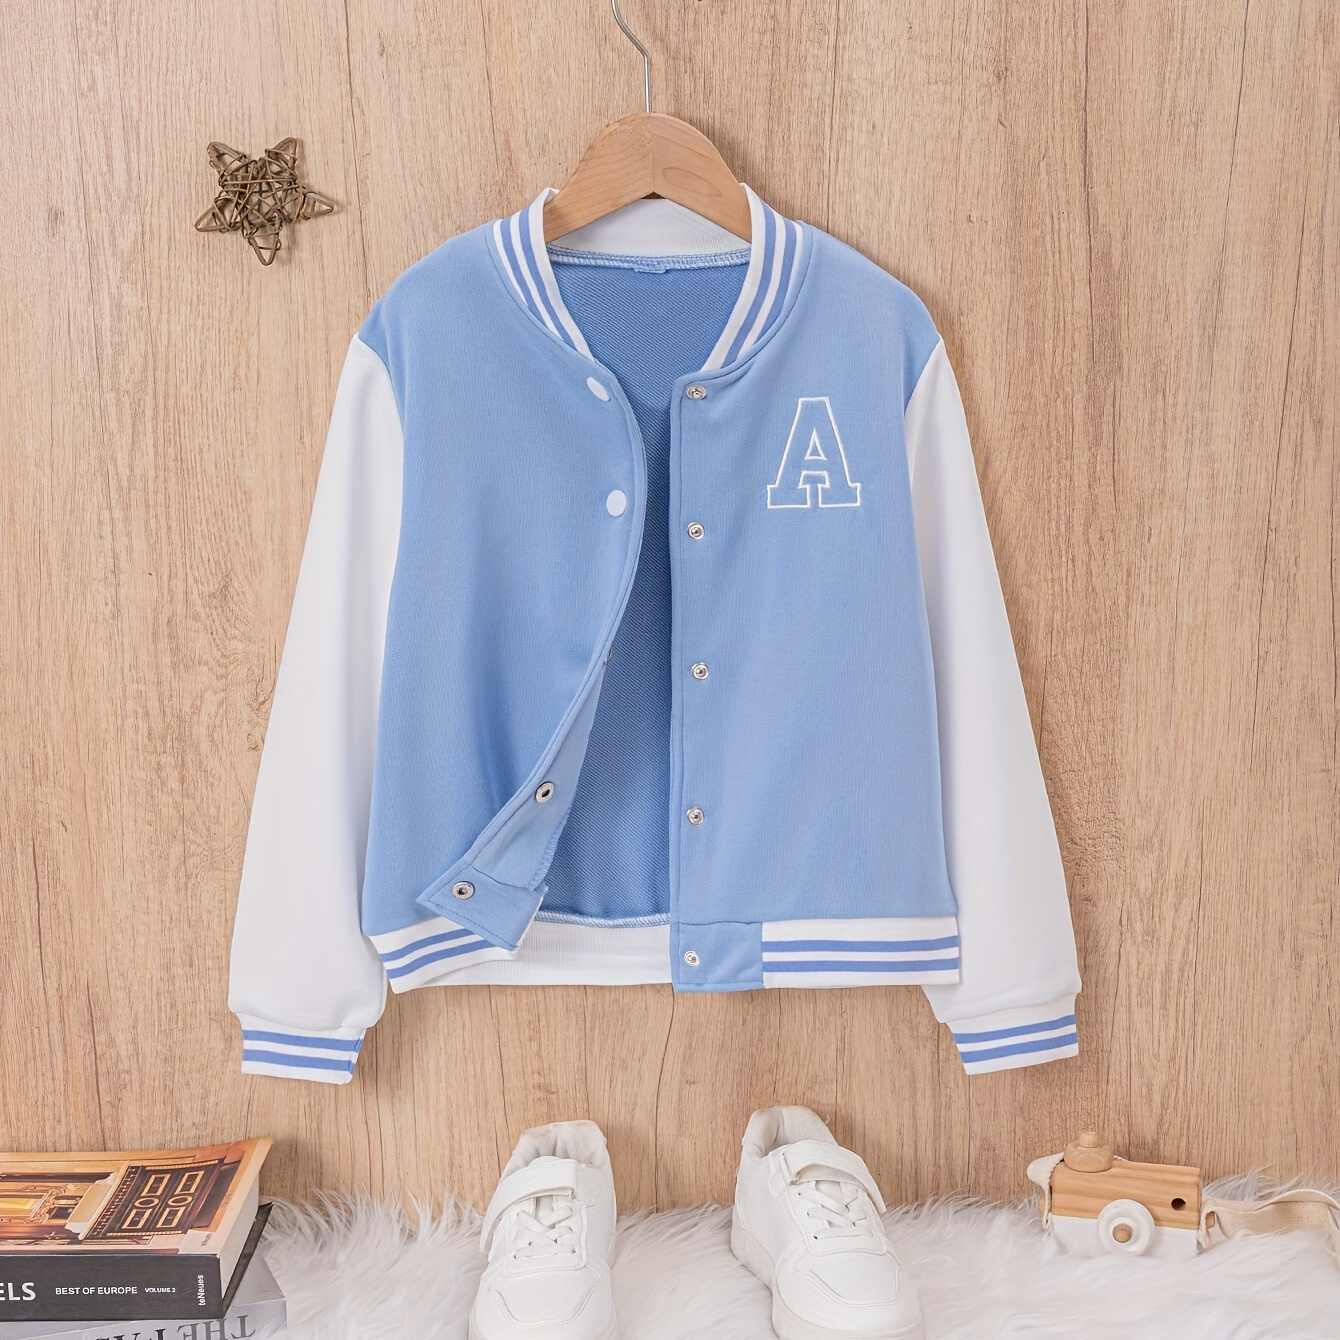 

Girls Casual Jacket Colorblock Fresh Style Simple Letter Print V-neck Front Buckle Sports Tops